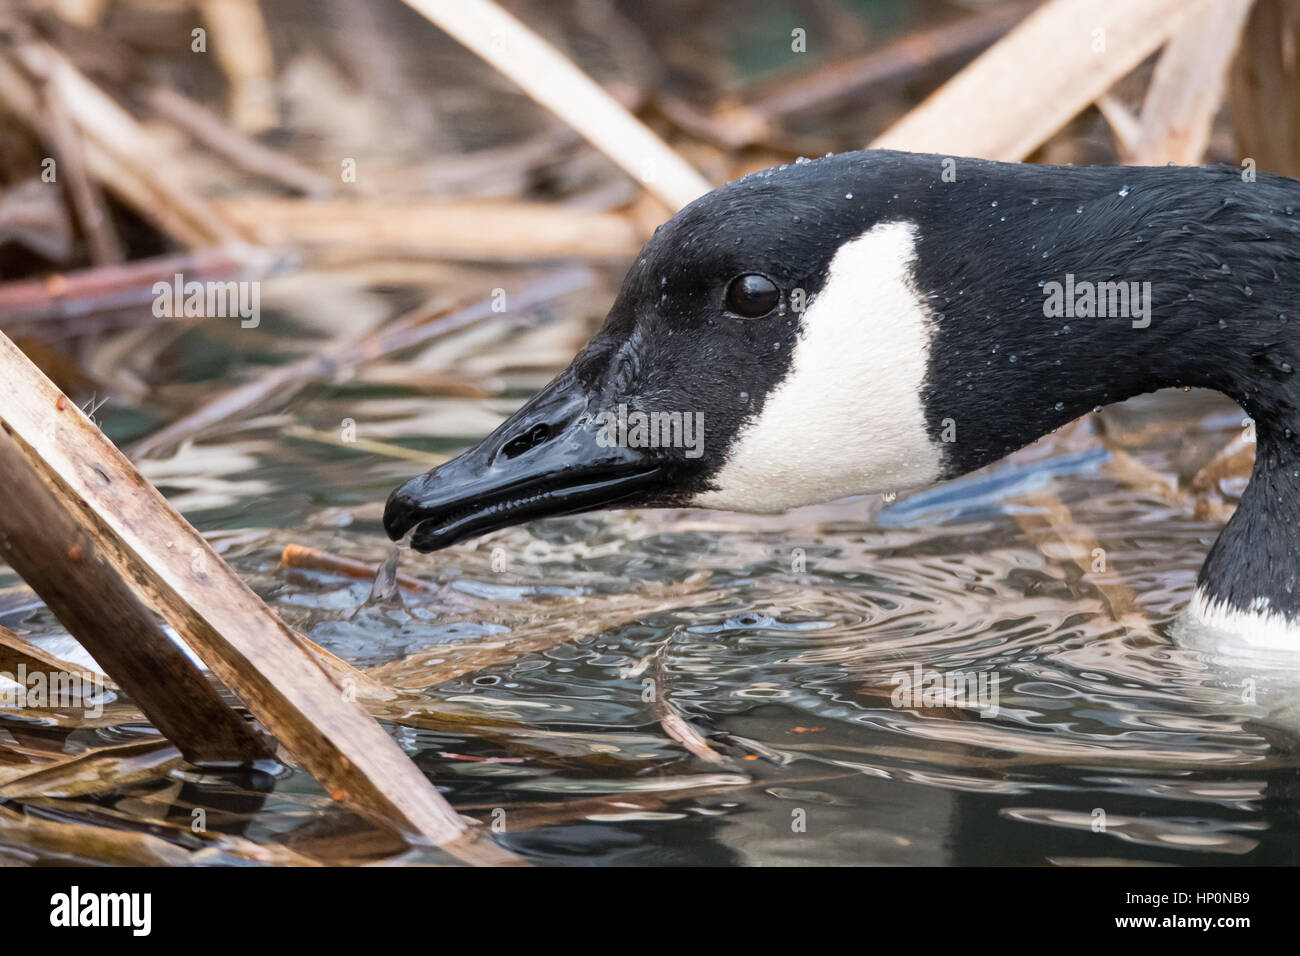 Canada goose (Branta canadensis) head and bill. Large black and white bird in the family Anatidae feeding in water amongst vegetation Stock Photo